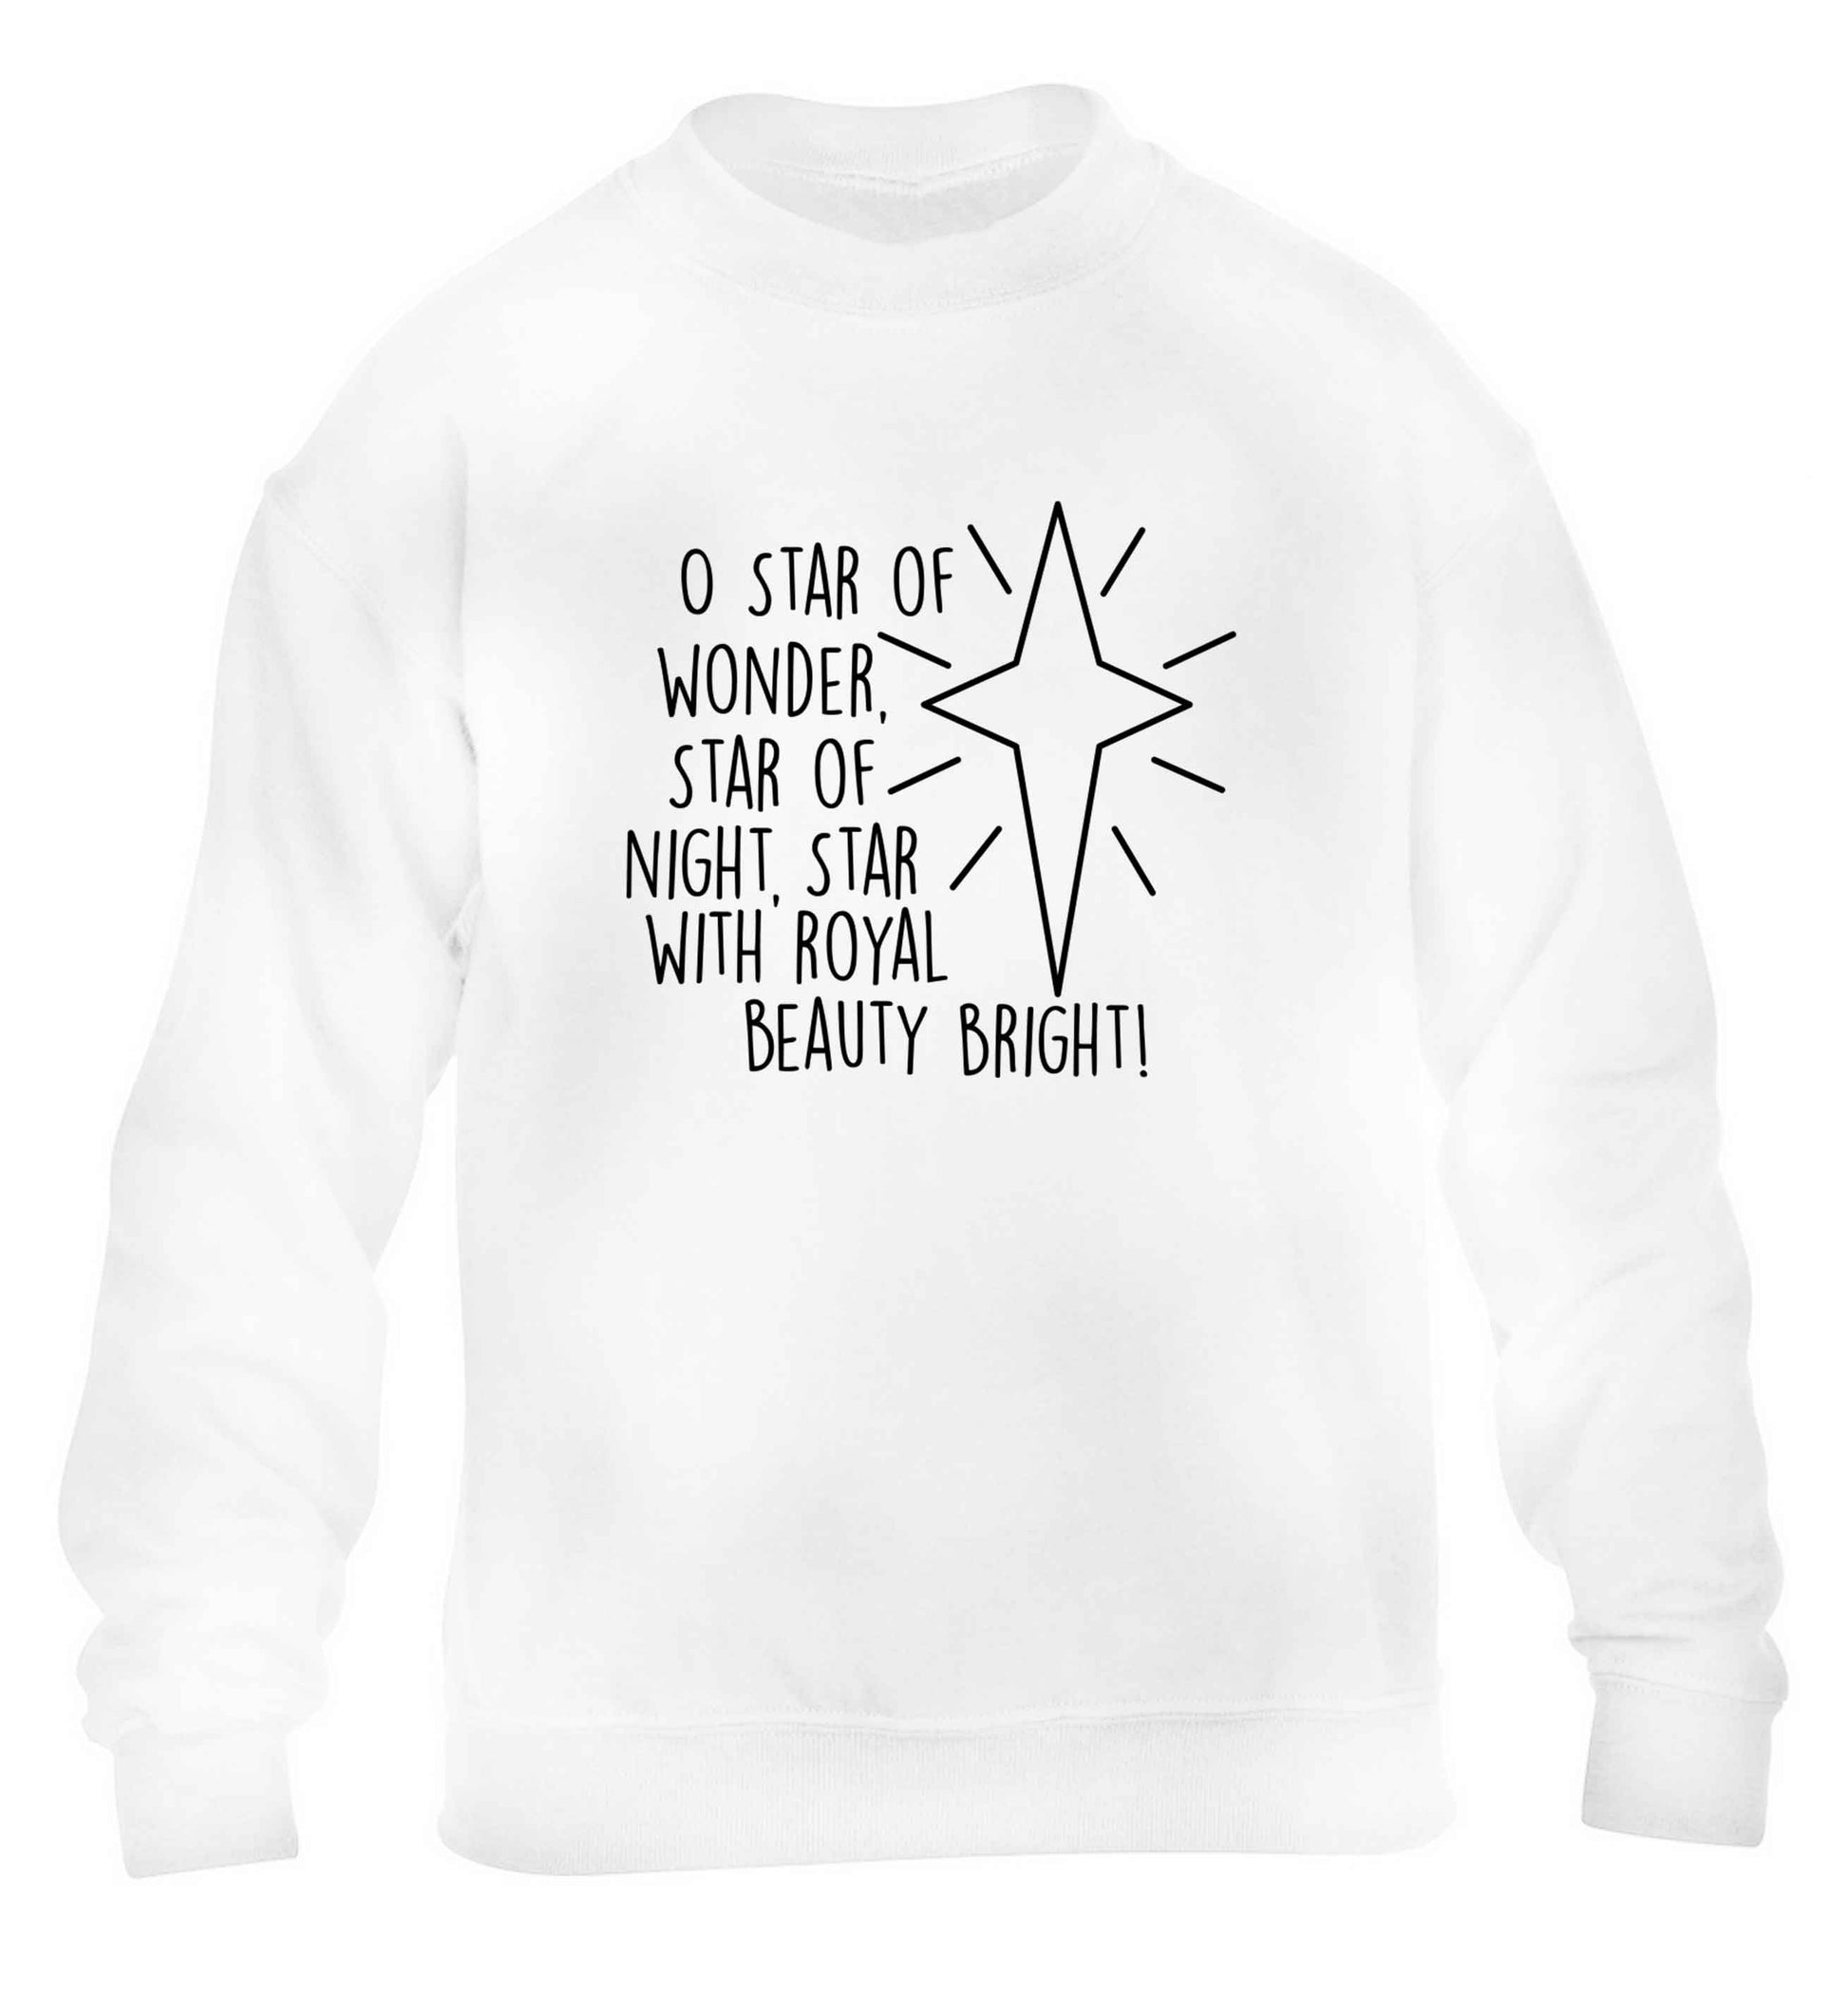 Oh star of wonder star of night, star with royal beauty bright children's white sweater 12-13 Years